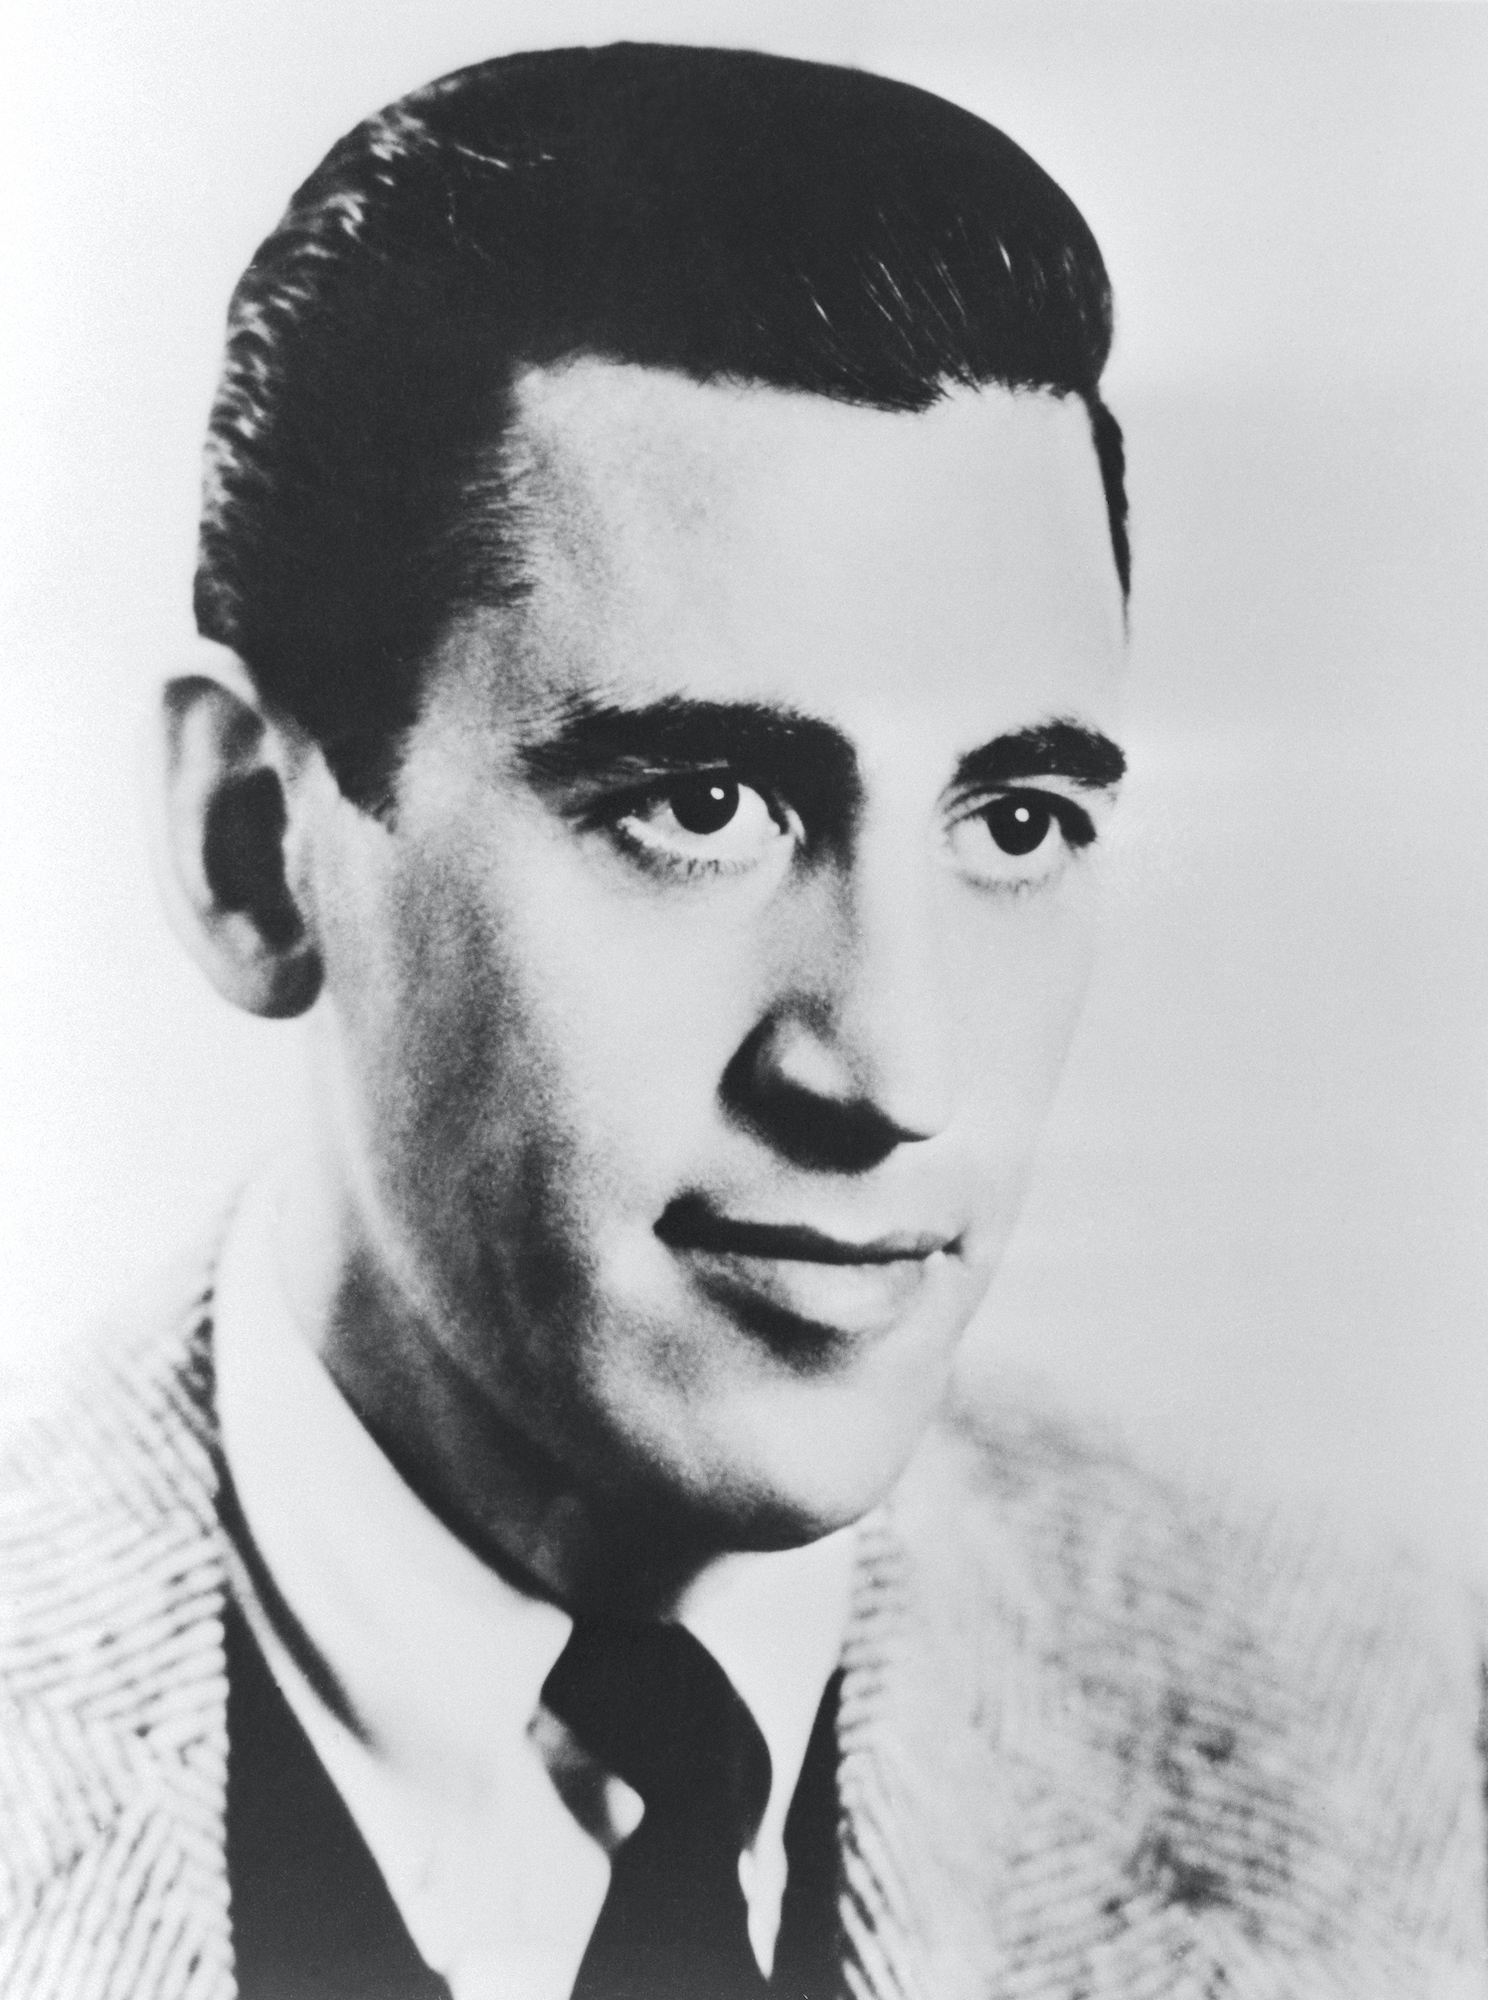 J.D. Salinger in black and white, looking off camera